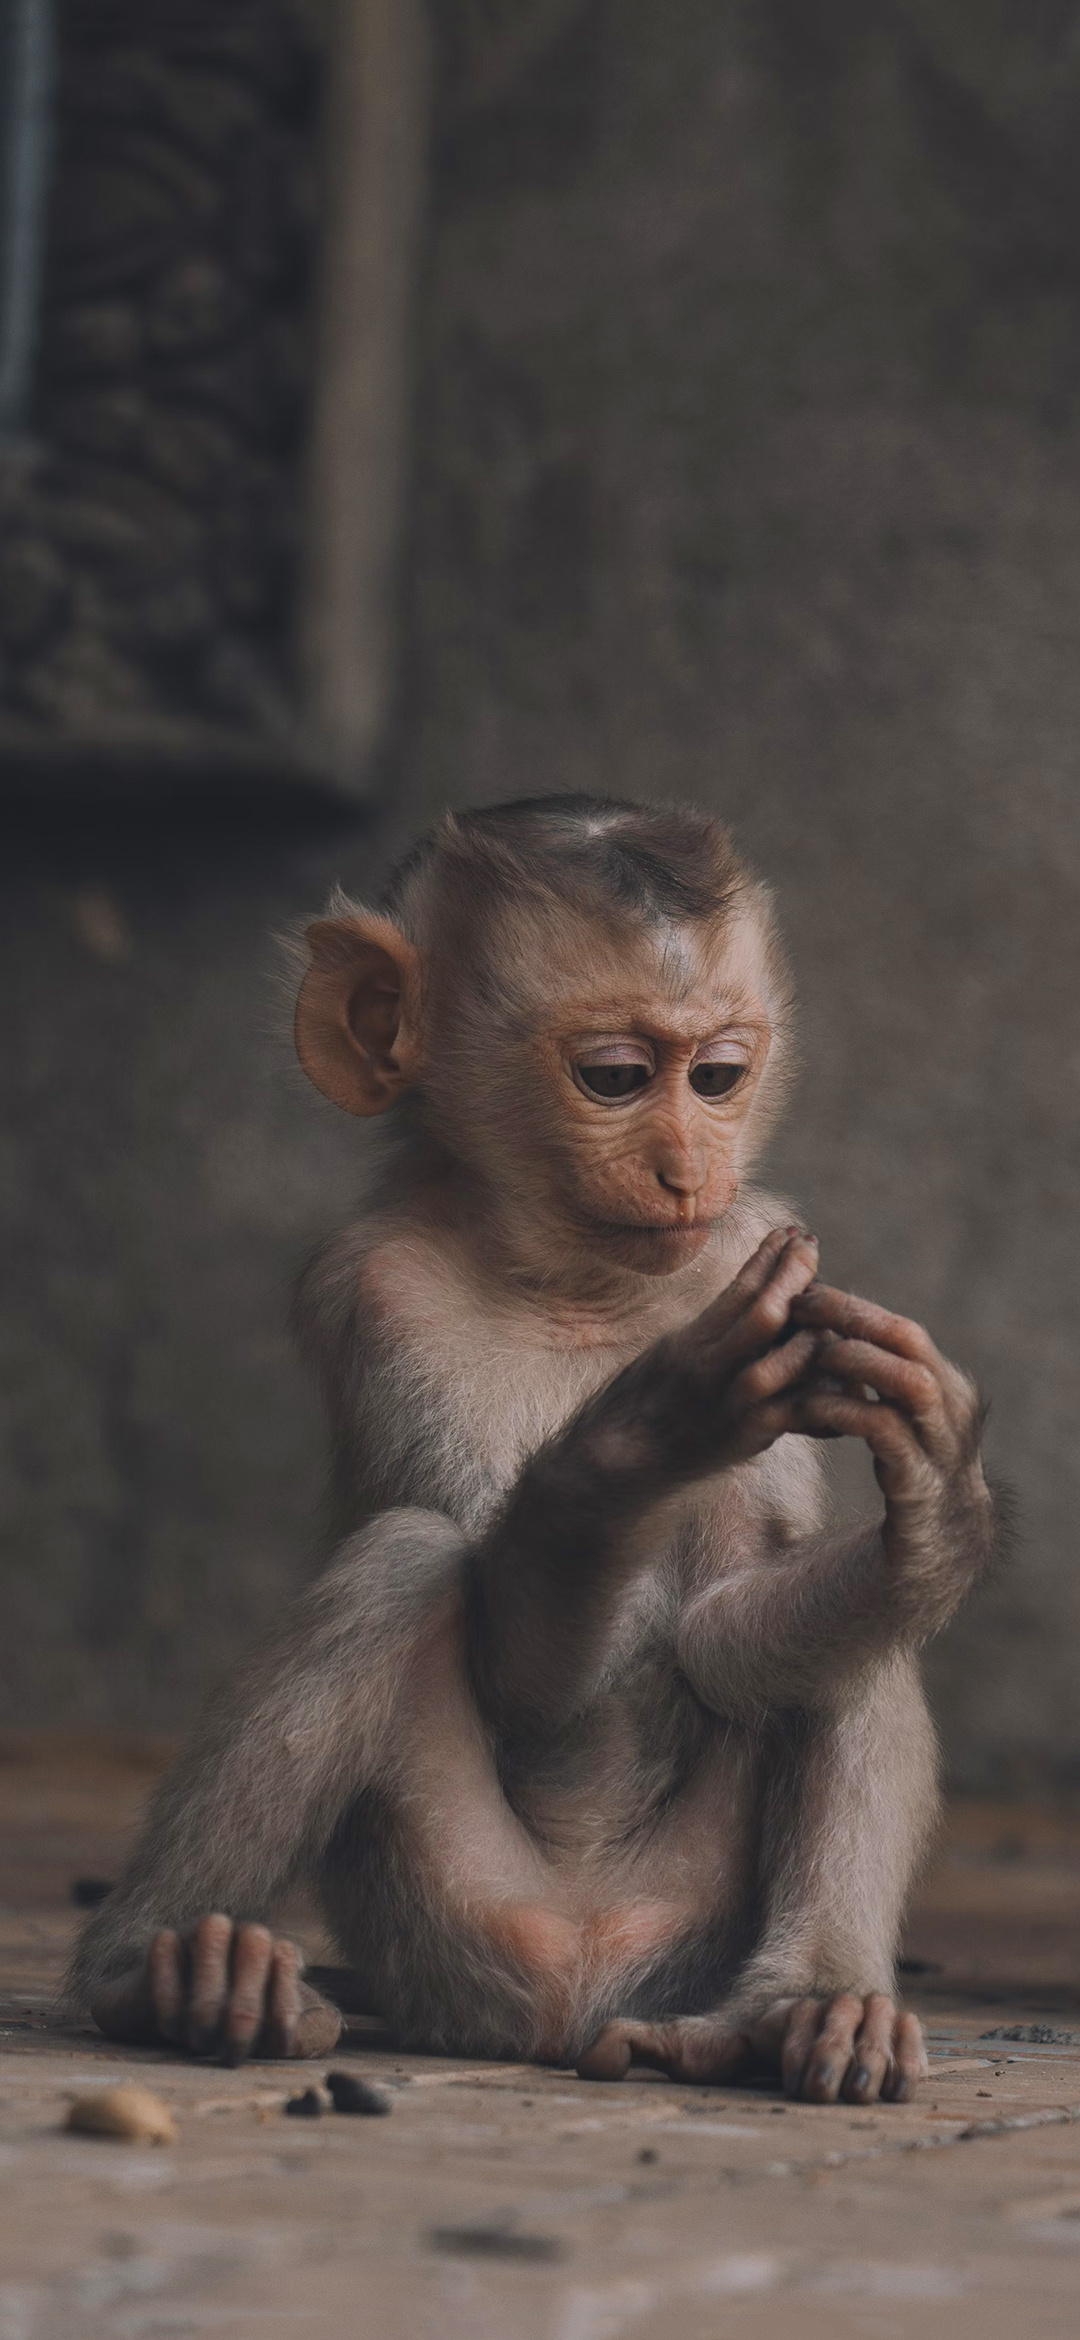 Monkey, monkey wallpapers, nature photography, wildlife lovers, 1080x2340 HD Handy